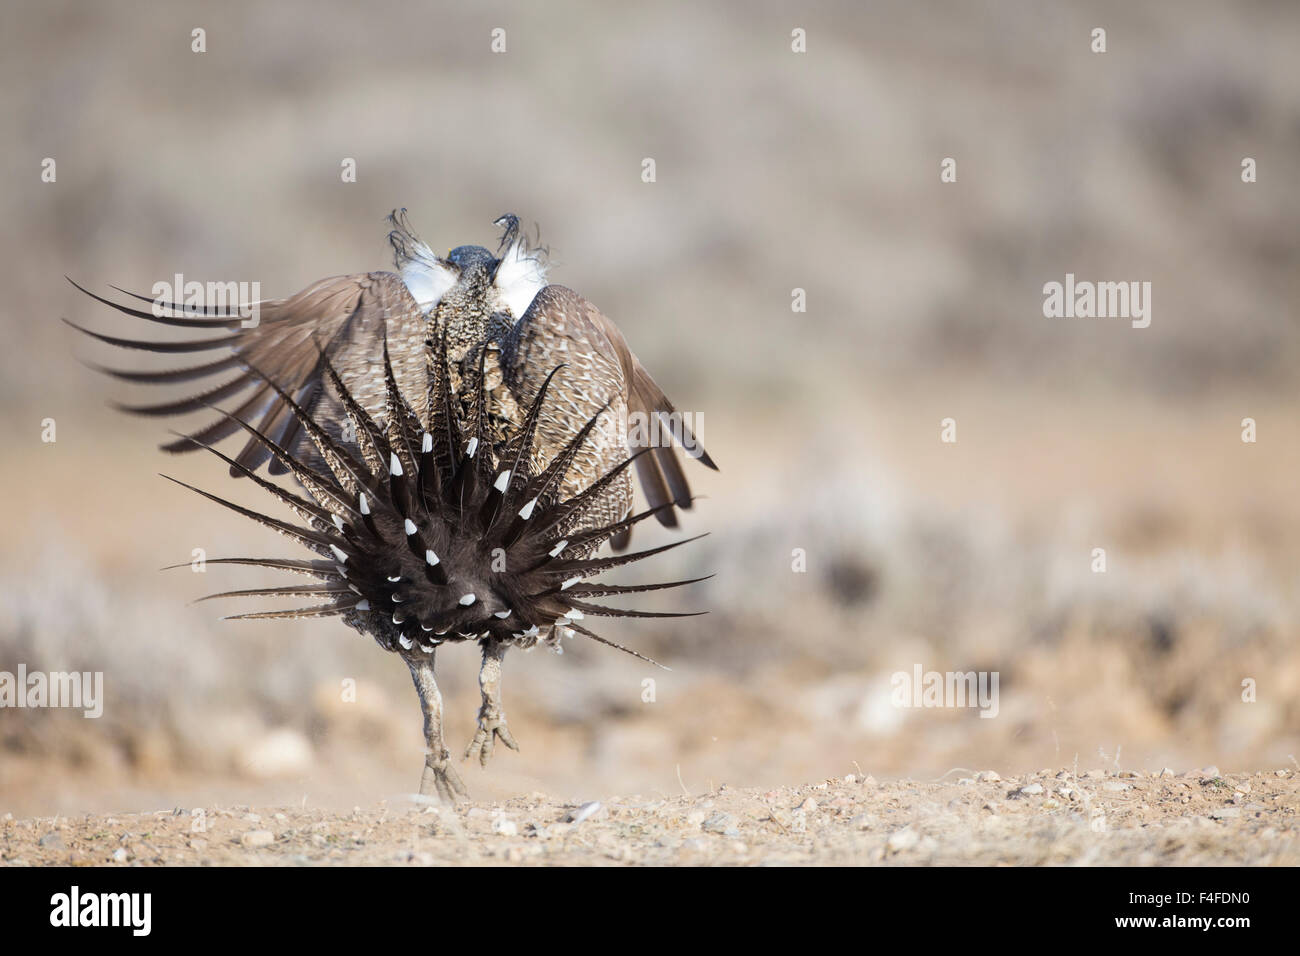 USA, Wyoming, Male Greater Sage Grouse, posterior view, hopping during display. Stock Photo